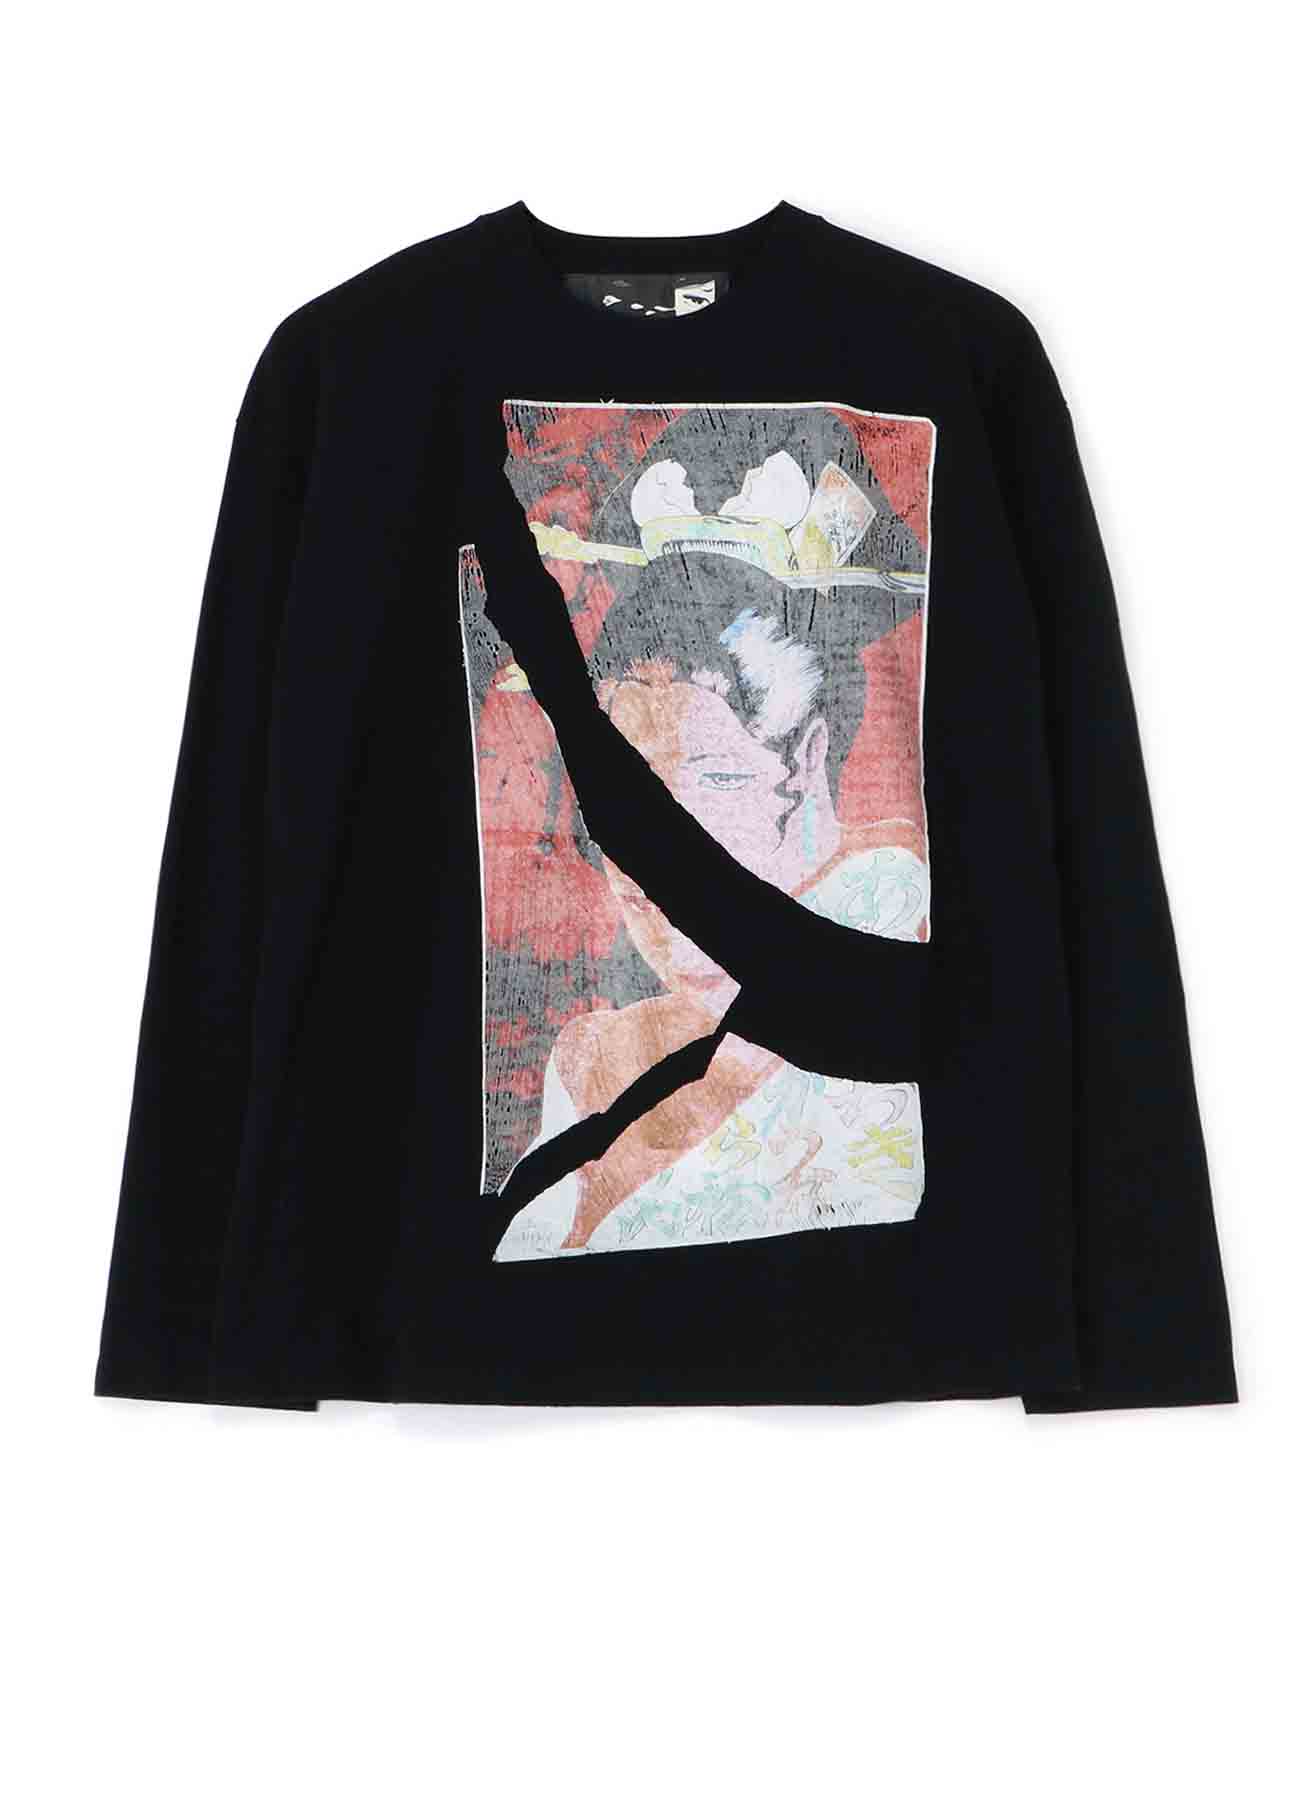 S'YTE x KAZUO KAMIMURA-COMICS COVER ART-COTTON JERSEY LONG SLEEVE T-SHIRT WITH DISTRESSED PHOTOCOPIER PRINT